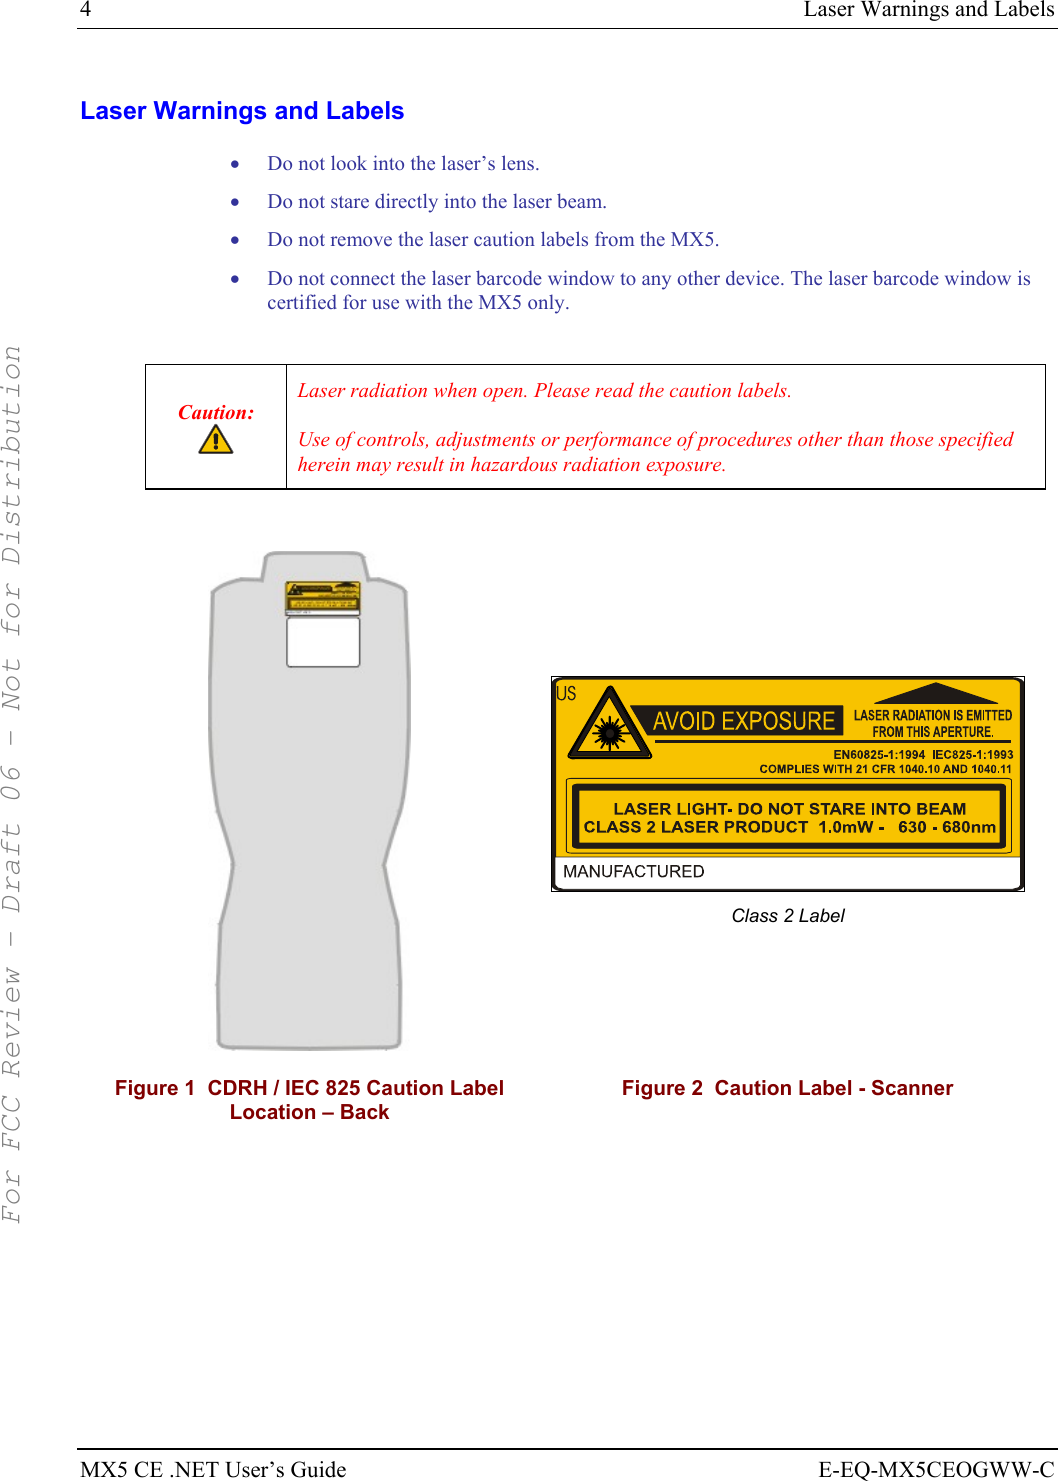 4  Laser Warnings and Labels MX5 CE .NET User’s Guide  E-EQ-MX5CEOGWW-C Laser Warnings and Labels • Do not look into the laser’s lens. • Do not stare directly into the laser beam.  • Do not remove the laser caution labels from the MX5.  • Do not connect the laser barcode window to any other device. The laser barcode window is certified for use with the MX5 only.  Caution:  Laser radiation when open. Please read the caution labels. Use of controls, adjustments or performance of procedures other than those specified herein may result in hazardous radiation exposure.    Class 2 Label  Figure 1  CDRH / IEC 825 Caution Label Location – Back Figure 2  Caution Label - Scanner    For FCC Review - Draft 06 - Not for Distribution